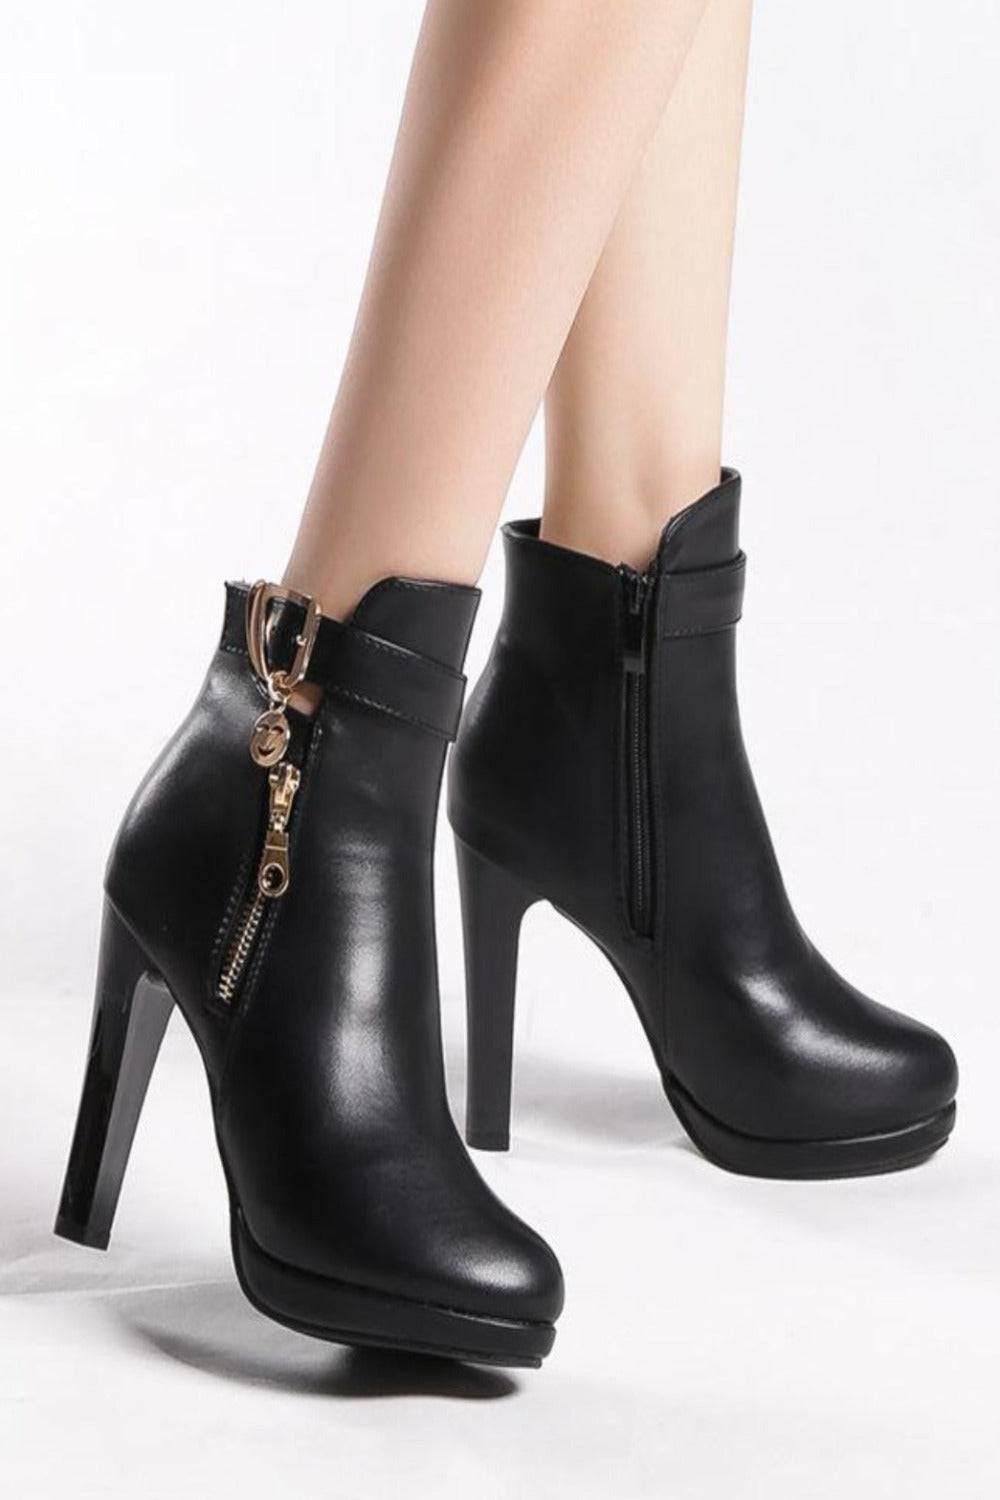 DREAM PAIRS Women's Fashion Ankle Boots - Chunky India | Ubuy